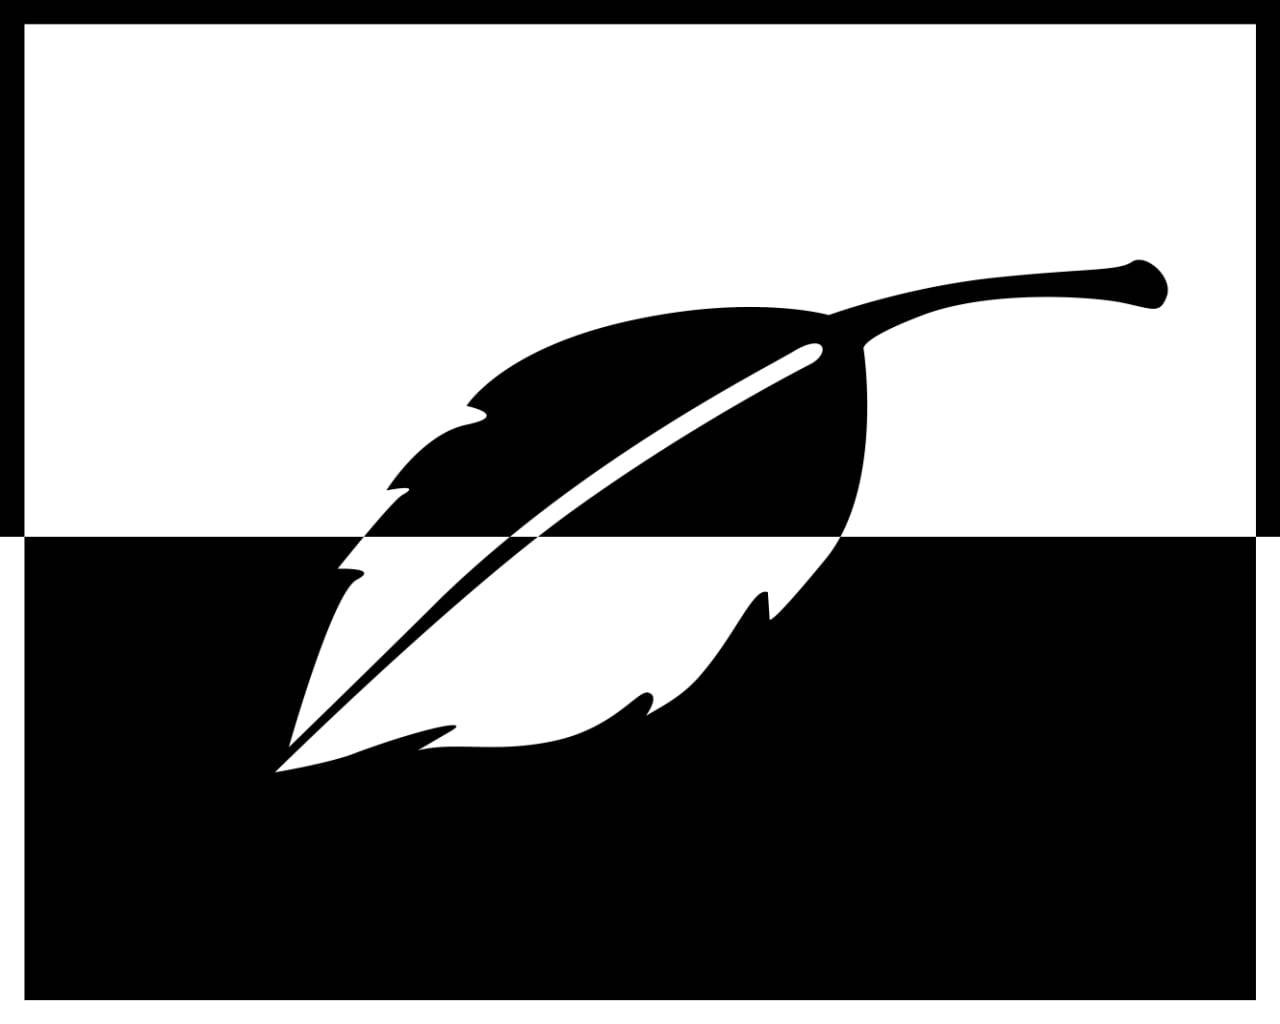 Caption: Striking Contrast - Black and White Leaf Graphic Pfp Wallpaper